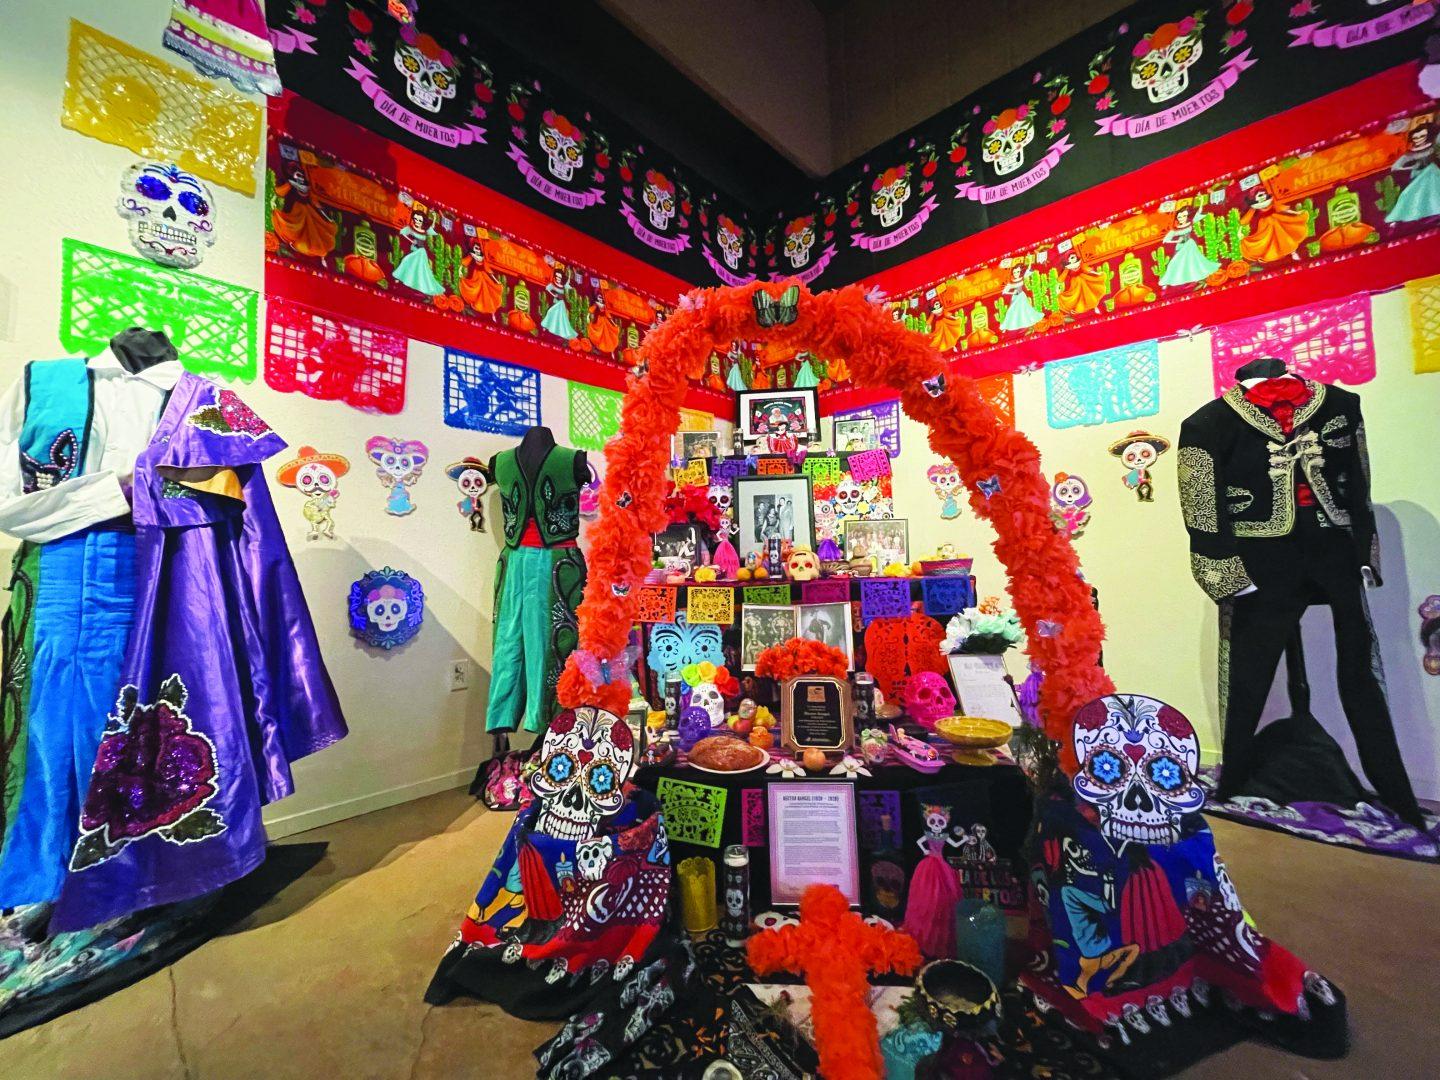 One of the colorful ofrendas celebrates the late folklorico dancer Hector Rangel. (Ashley Flowers/The Collegian)